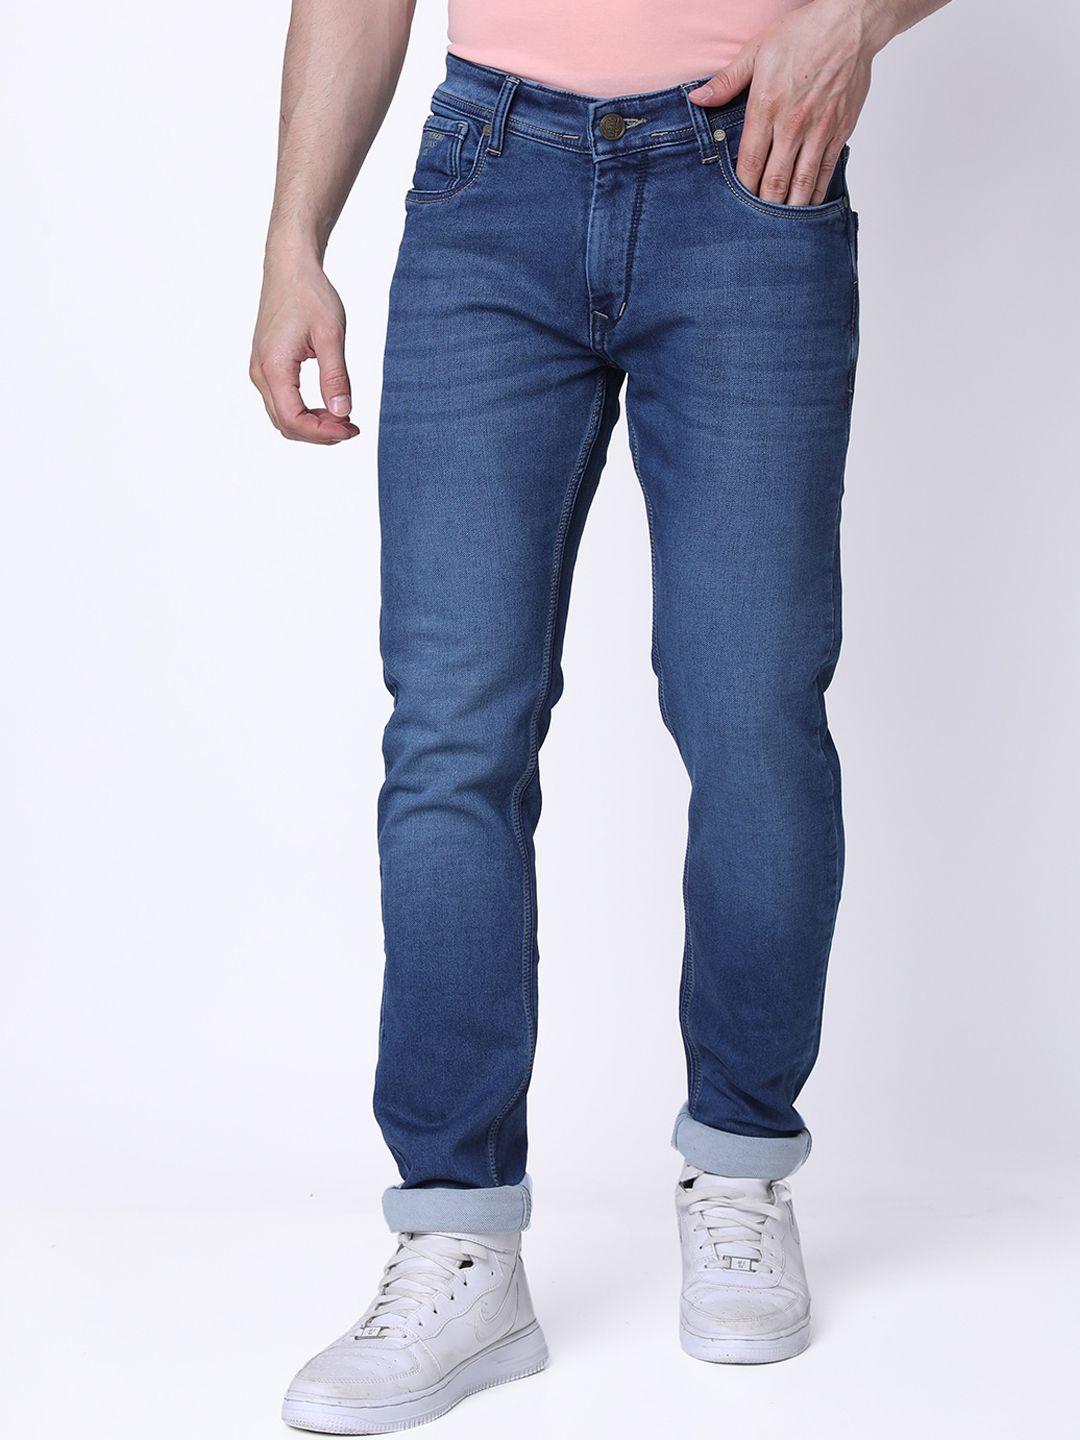 oxemberg lean men slim fit mid-rise light fade clean look stretchable jeans